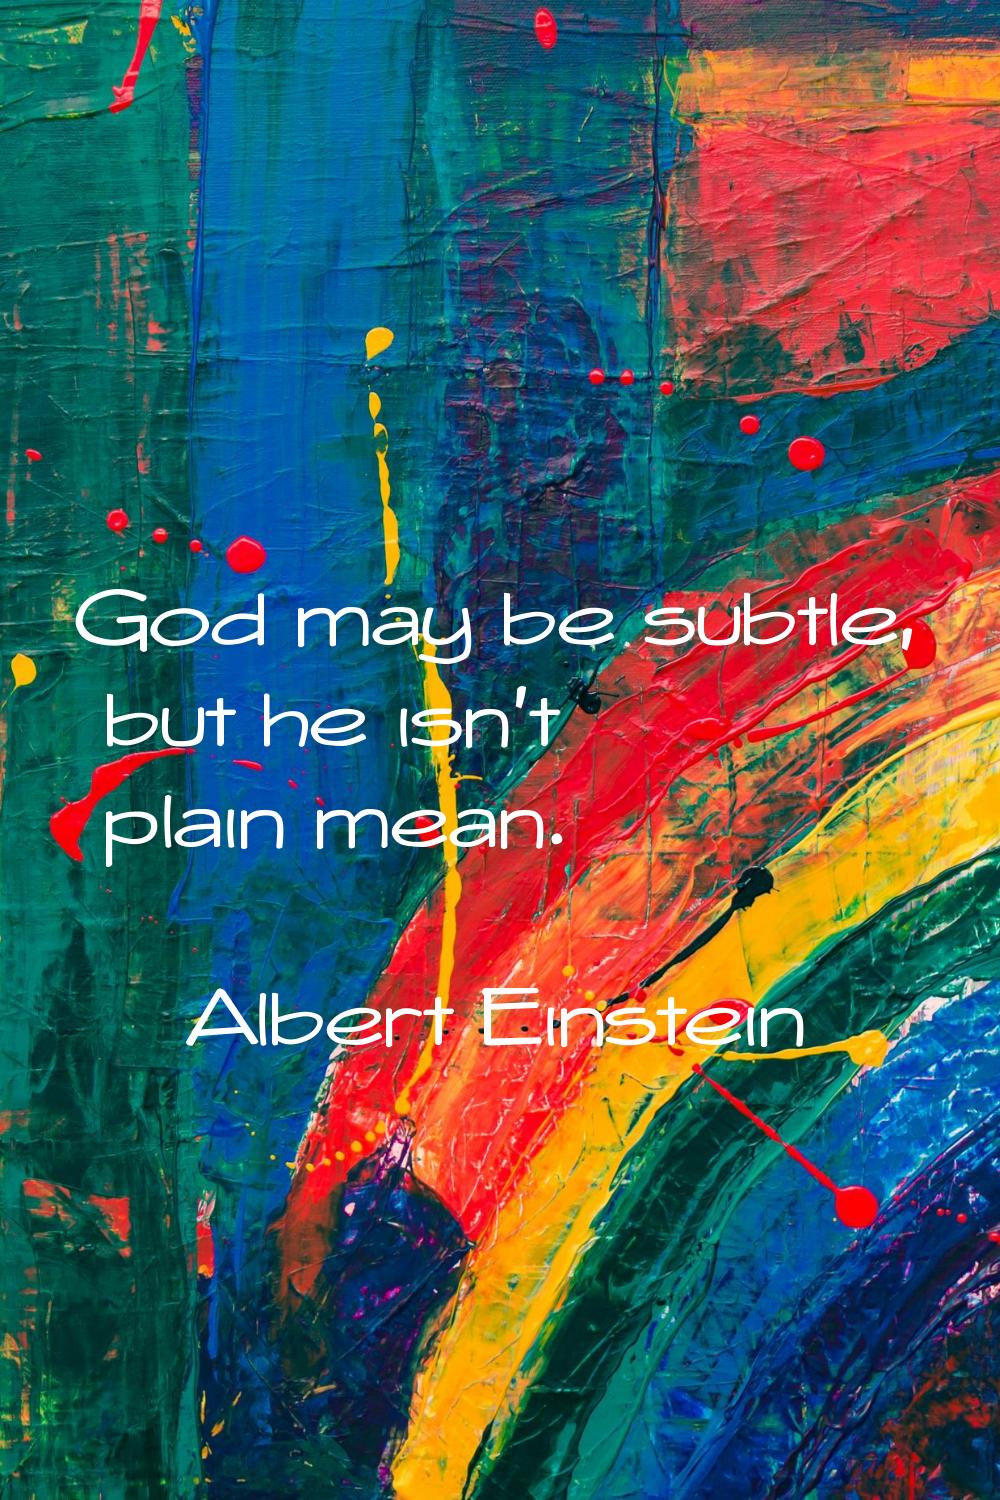 God may be subtle, but he isn't plain mean.